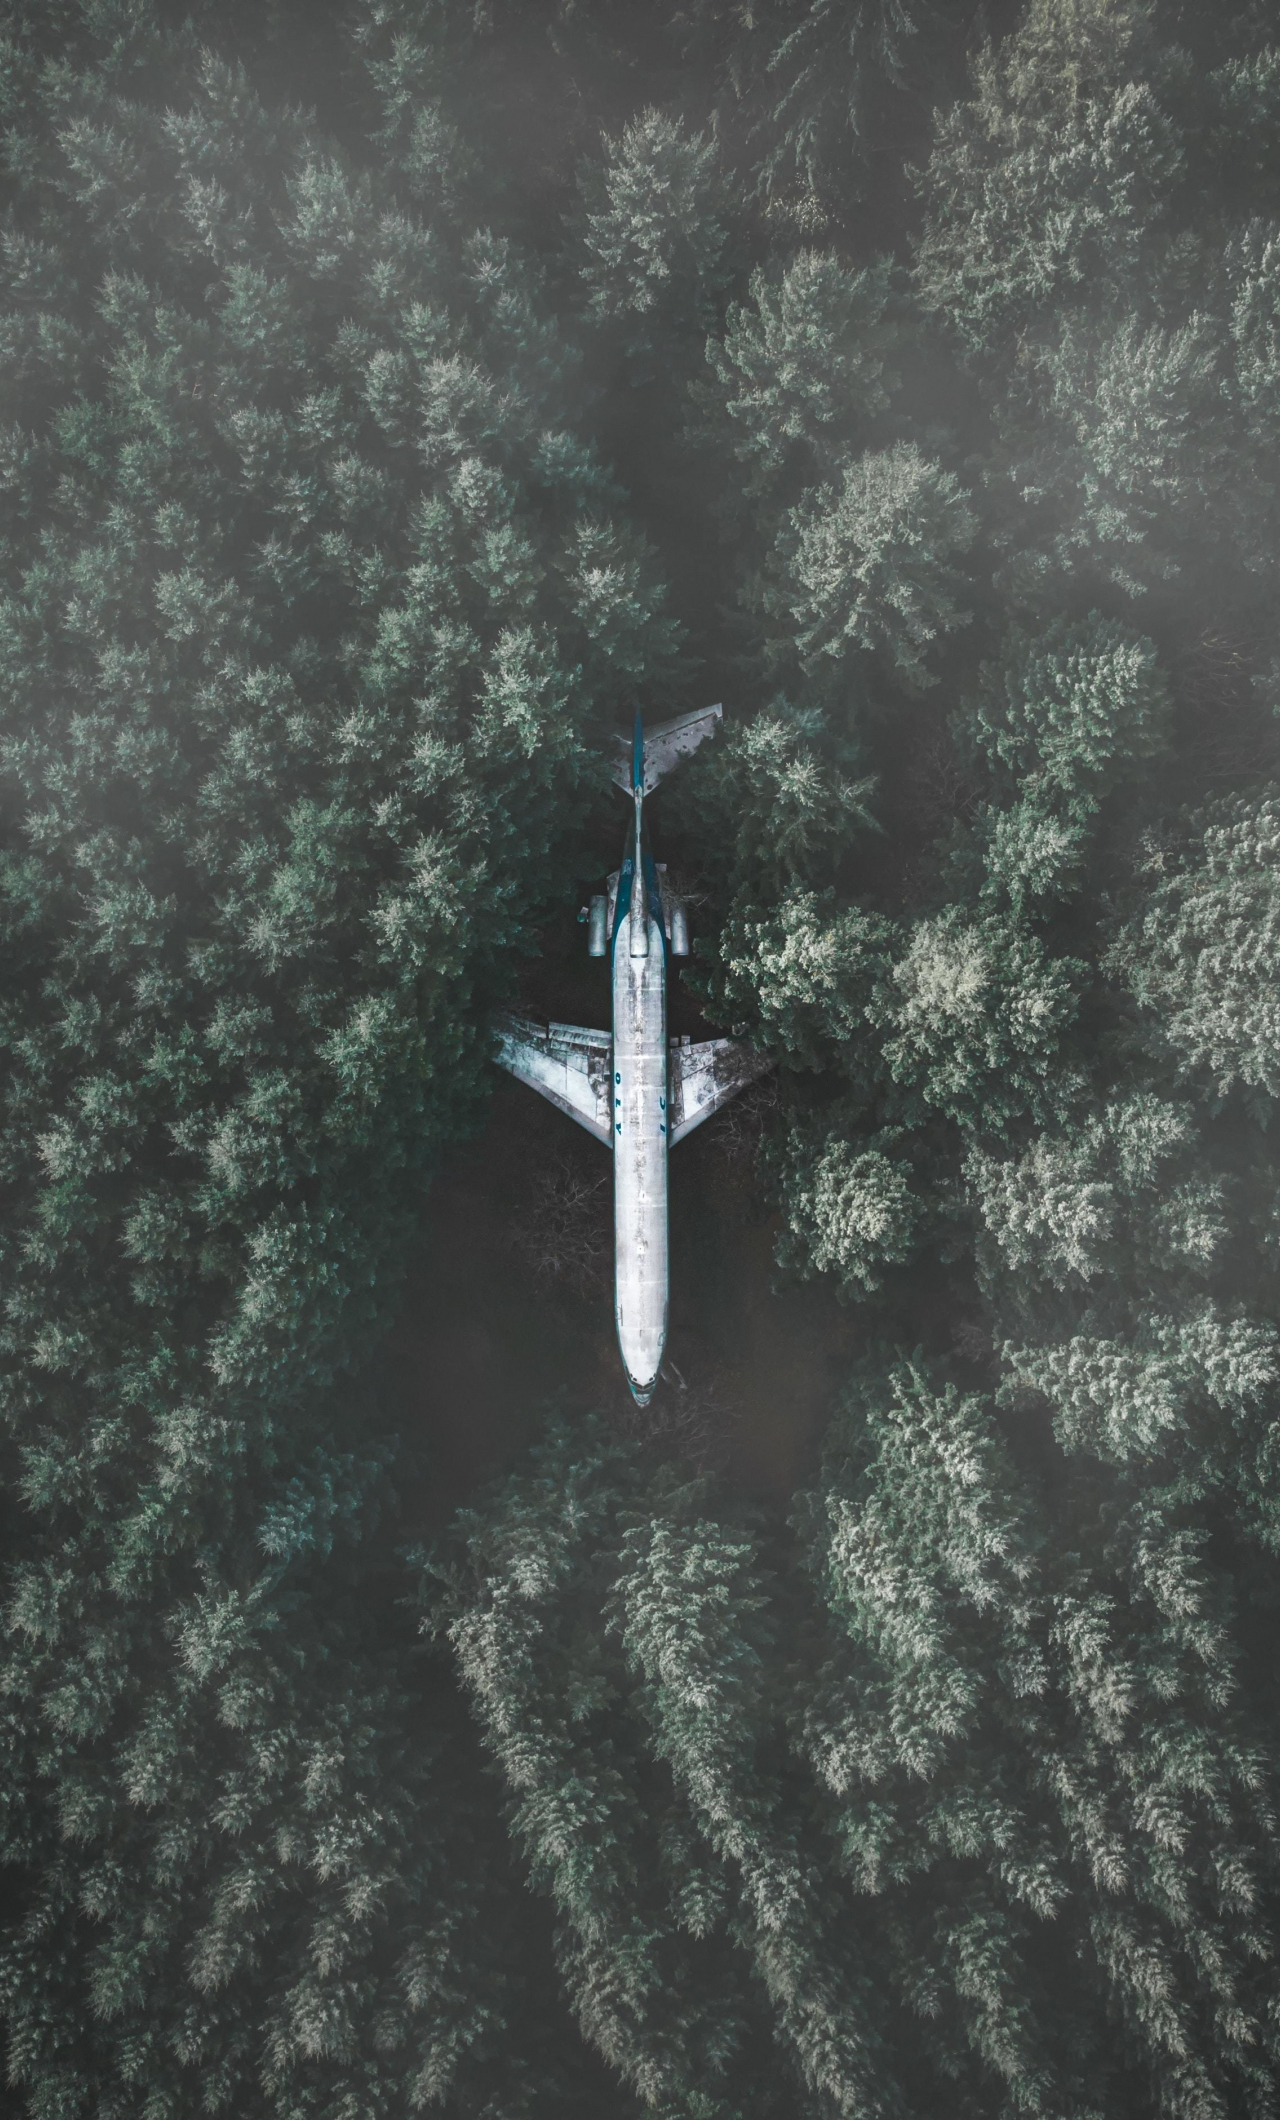 Download wallpaper 1280x2120 airplane, forest, aerial view, iphone 6 plus,  1280x2120 hd background, 23519